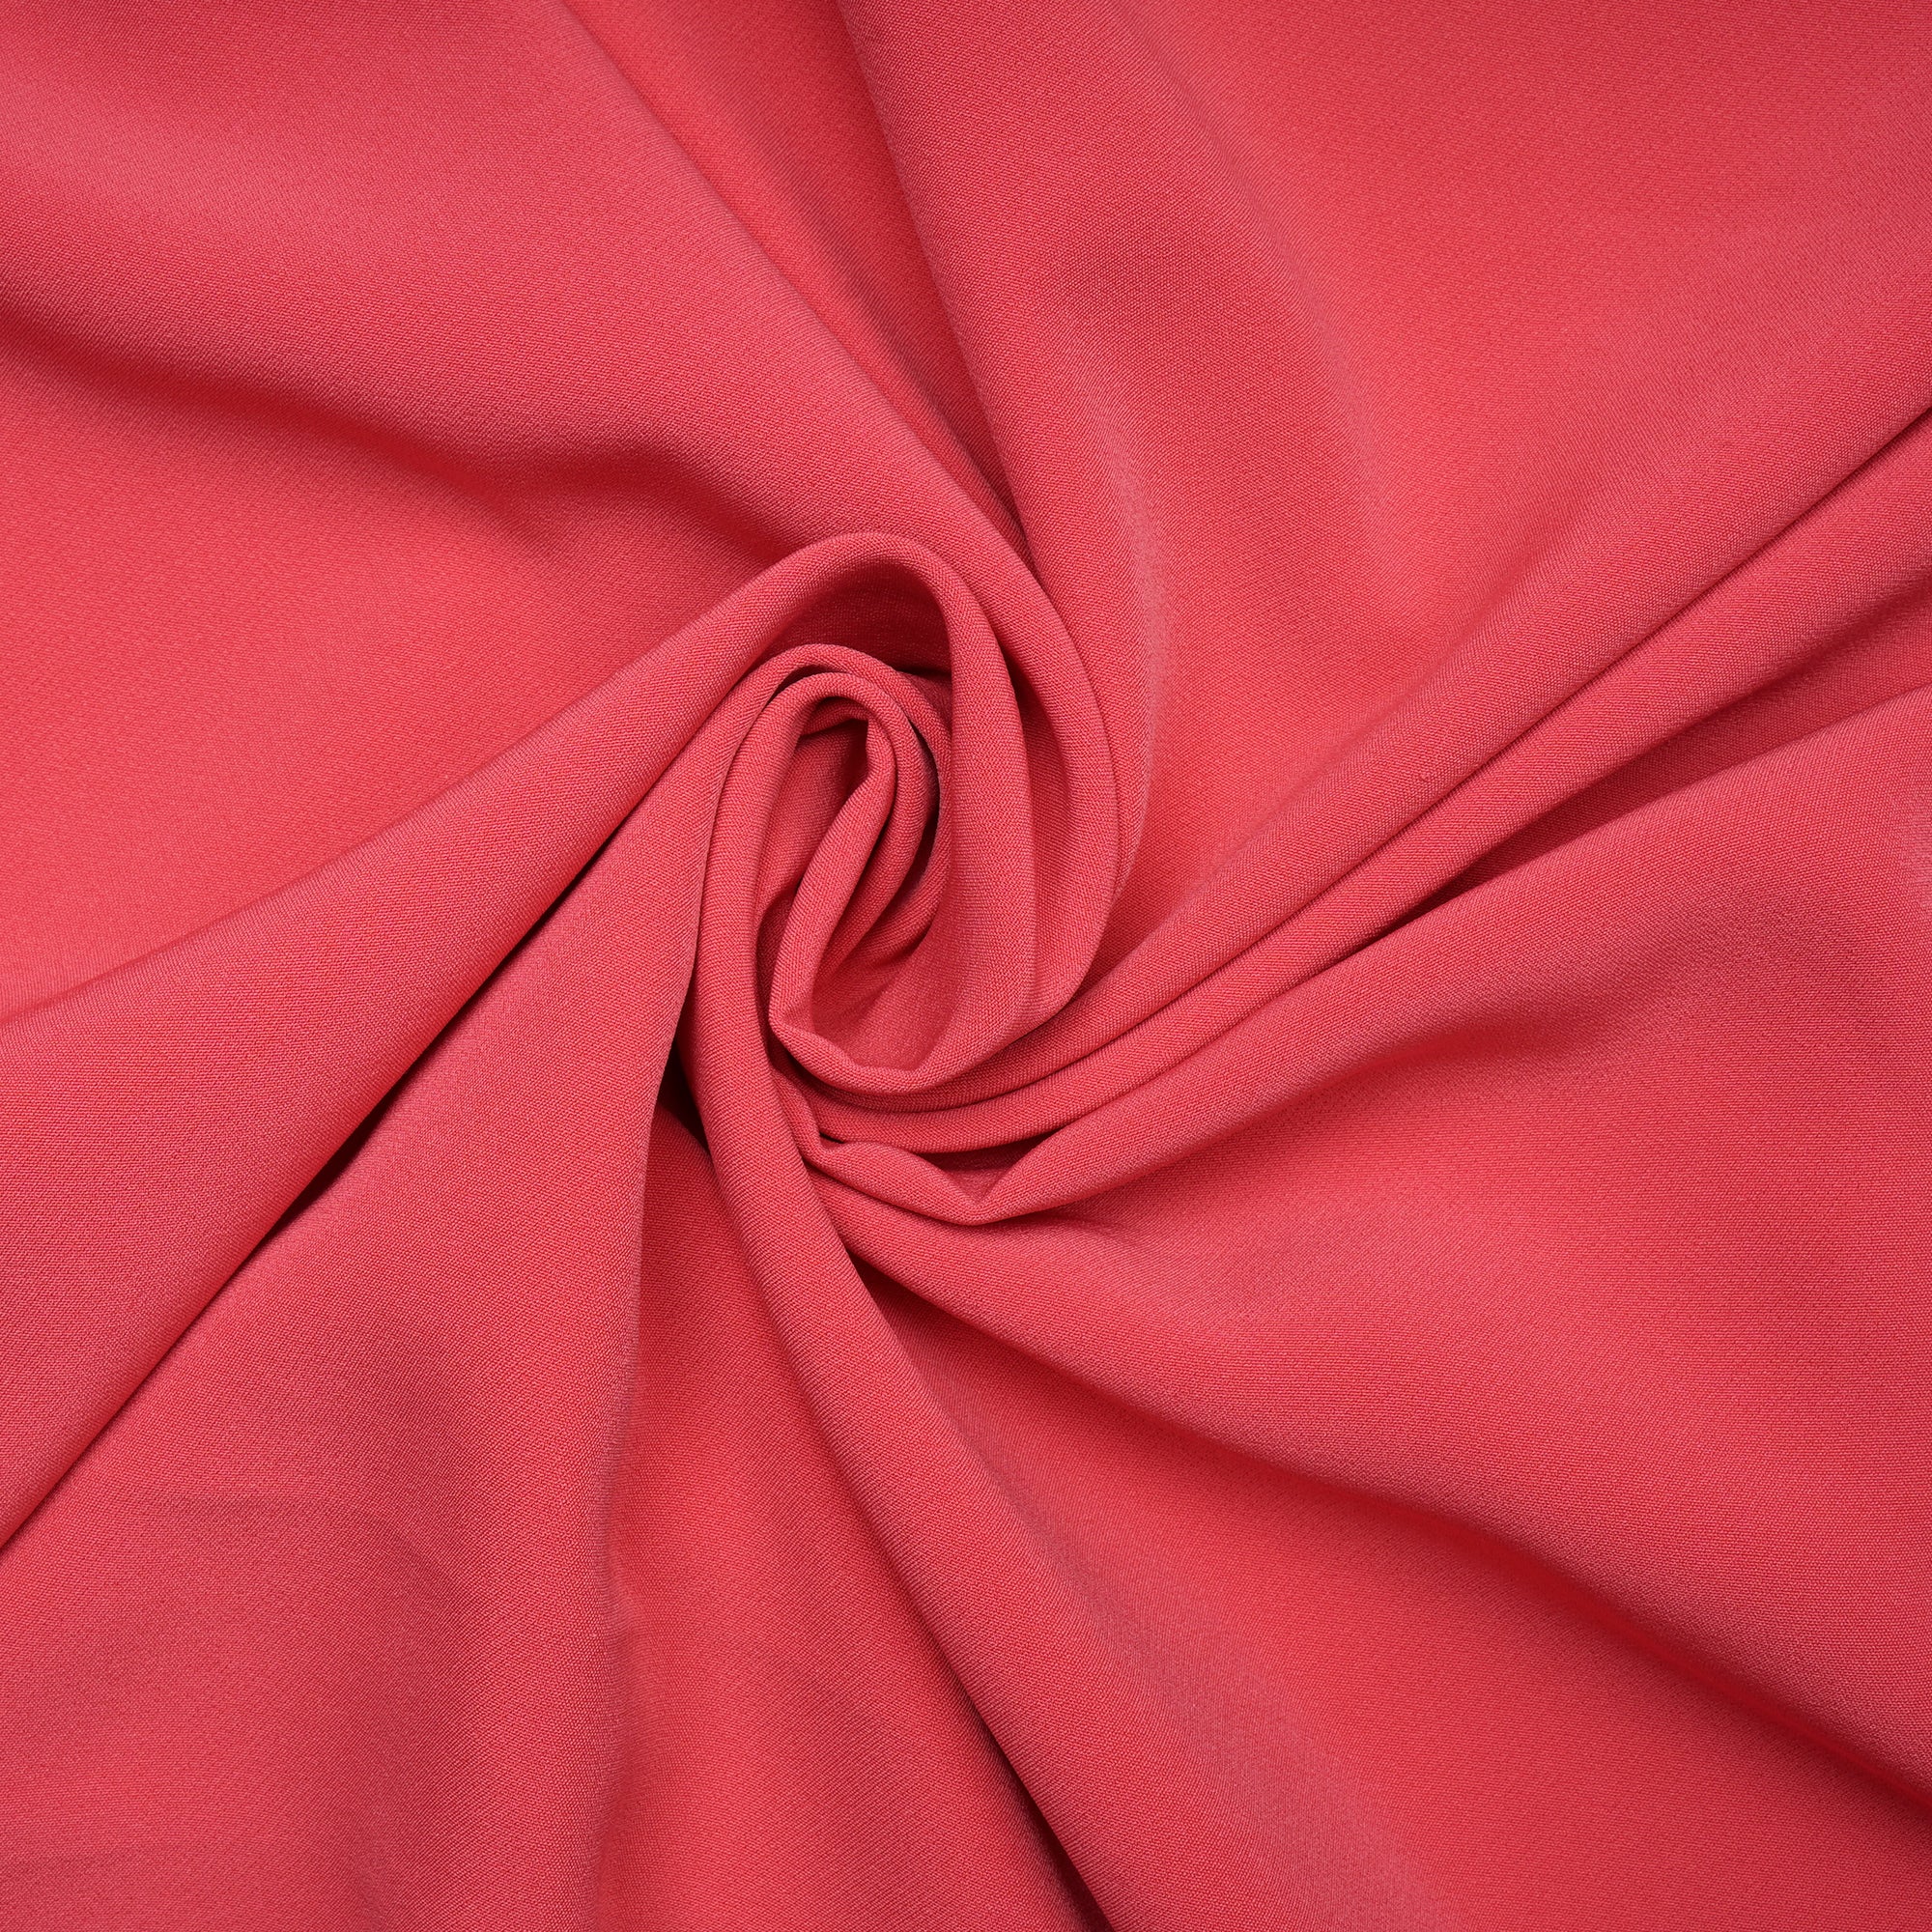 Paradise Pink Solid Dyed Imported Banana Crepe Fabric (60" Width)